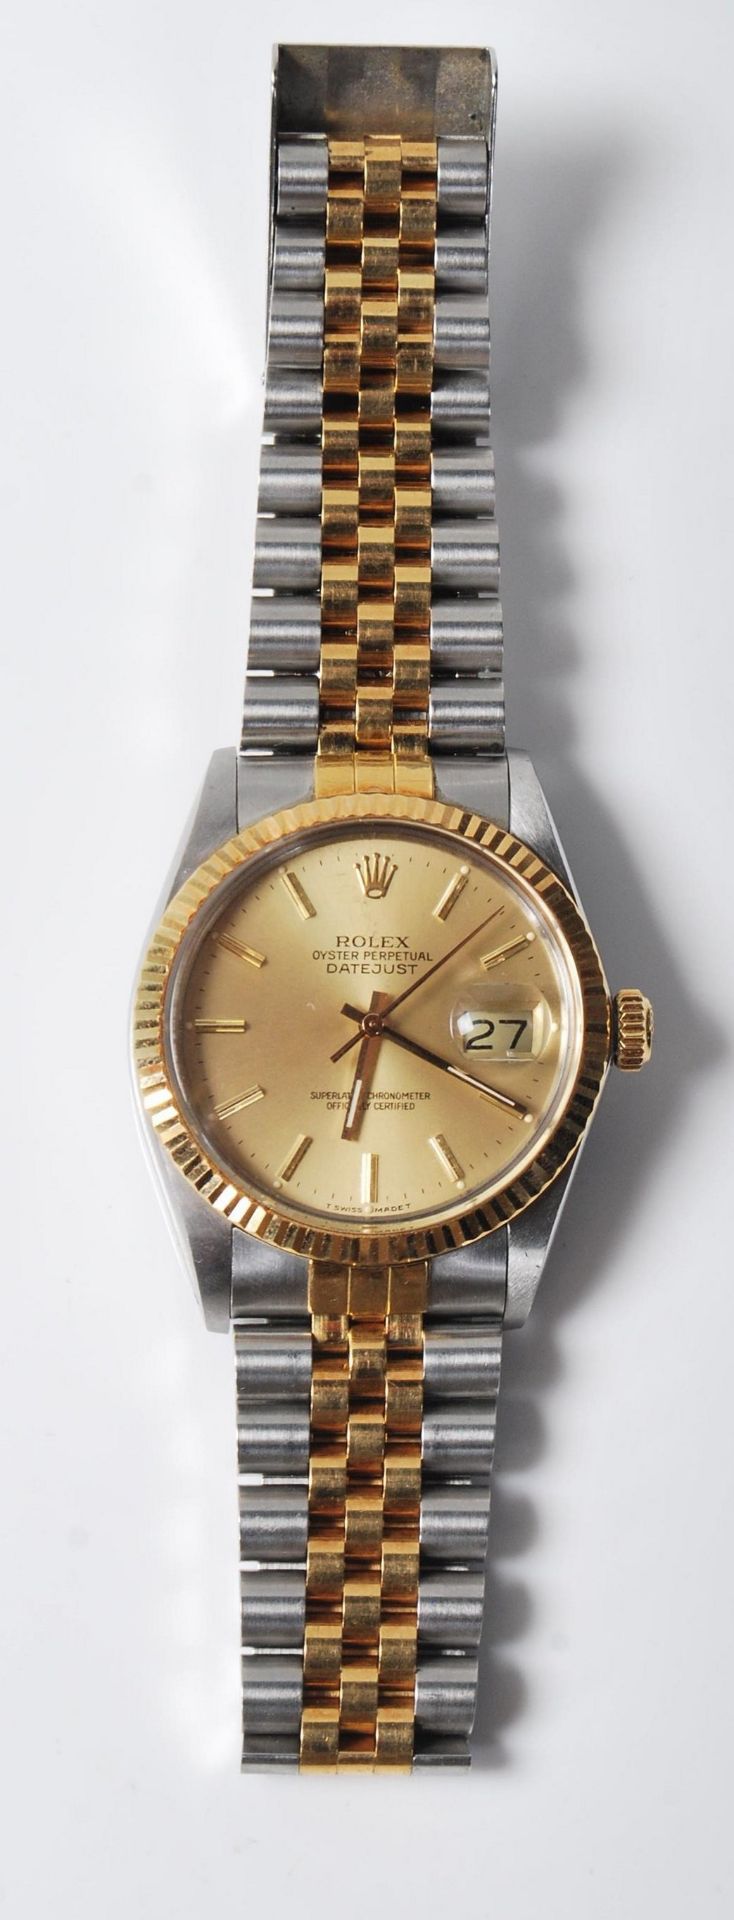 A gentleman's Rolex Oyster Perpetual Datejust superlative chronometer gold and stainless steel